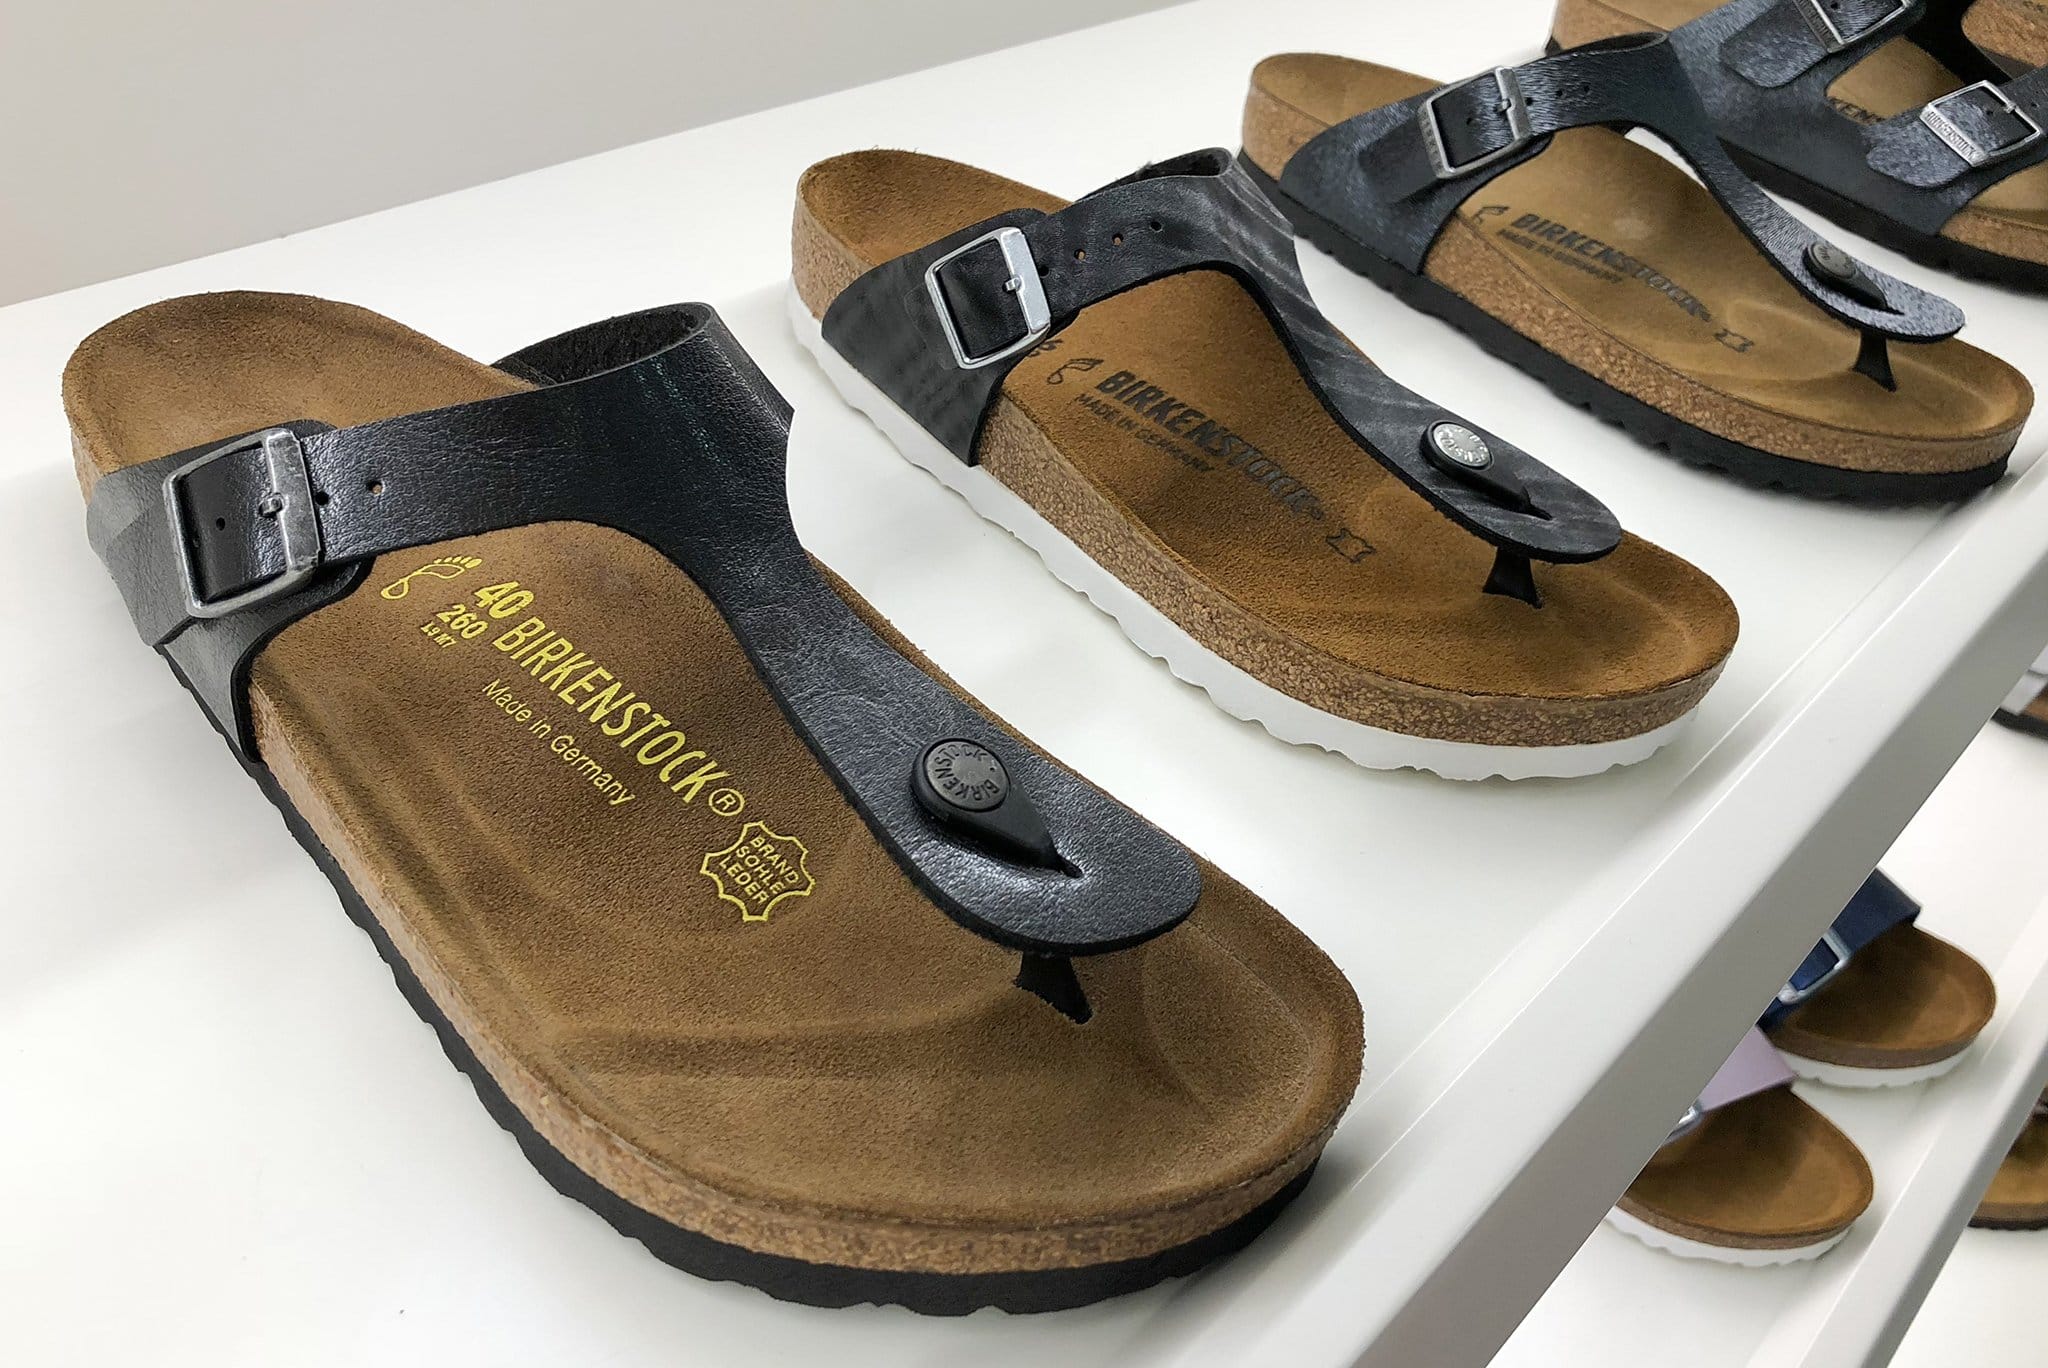 Birkenstock's Gizeh thong sandals feature arch support designed for all-day walking